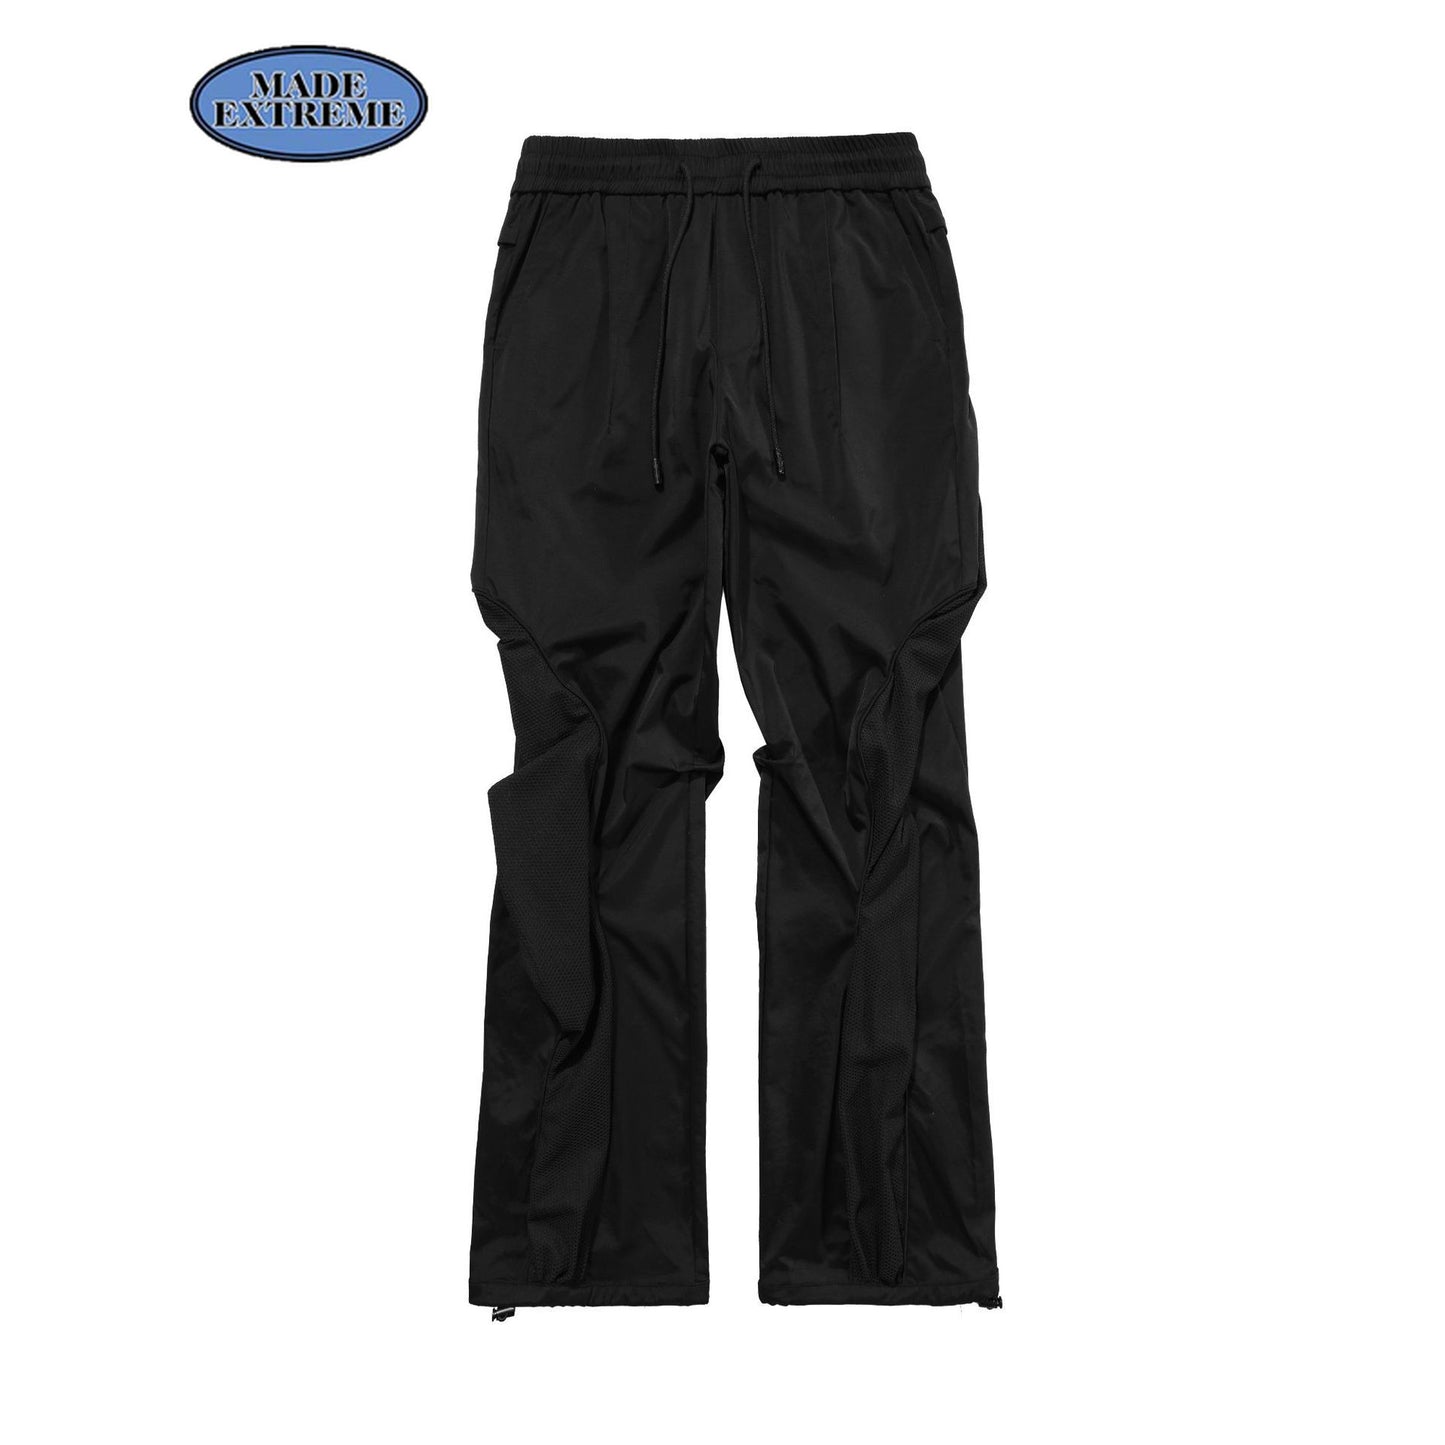 Made Extreme tactical pleated unisex cargo pants